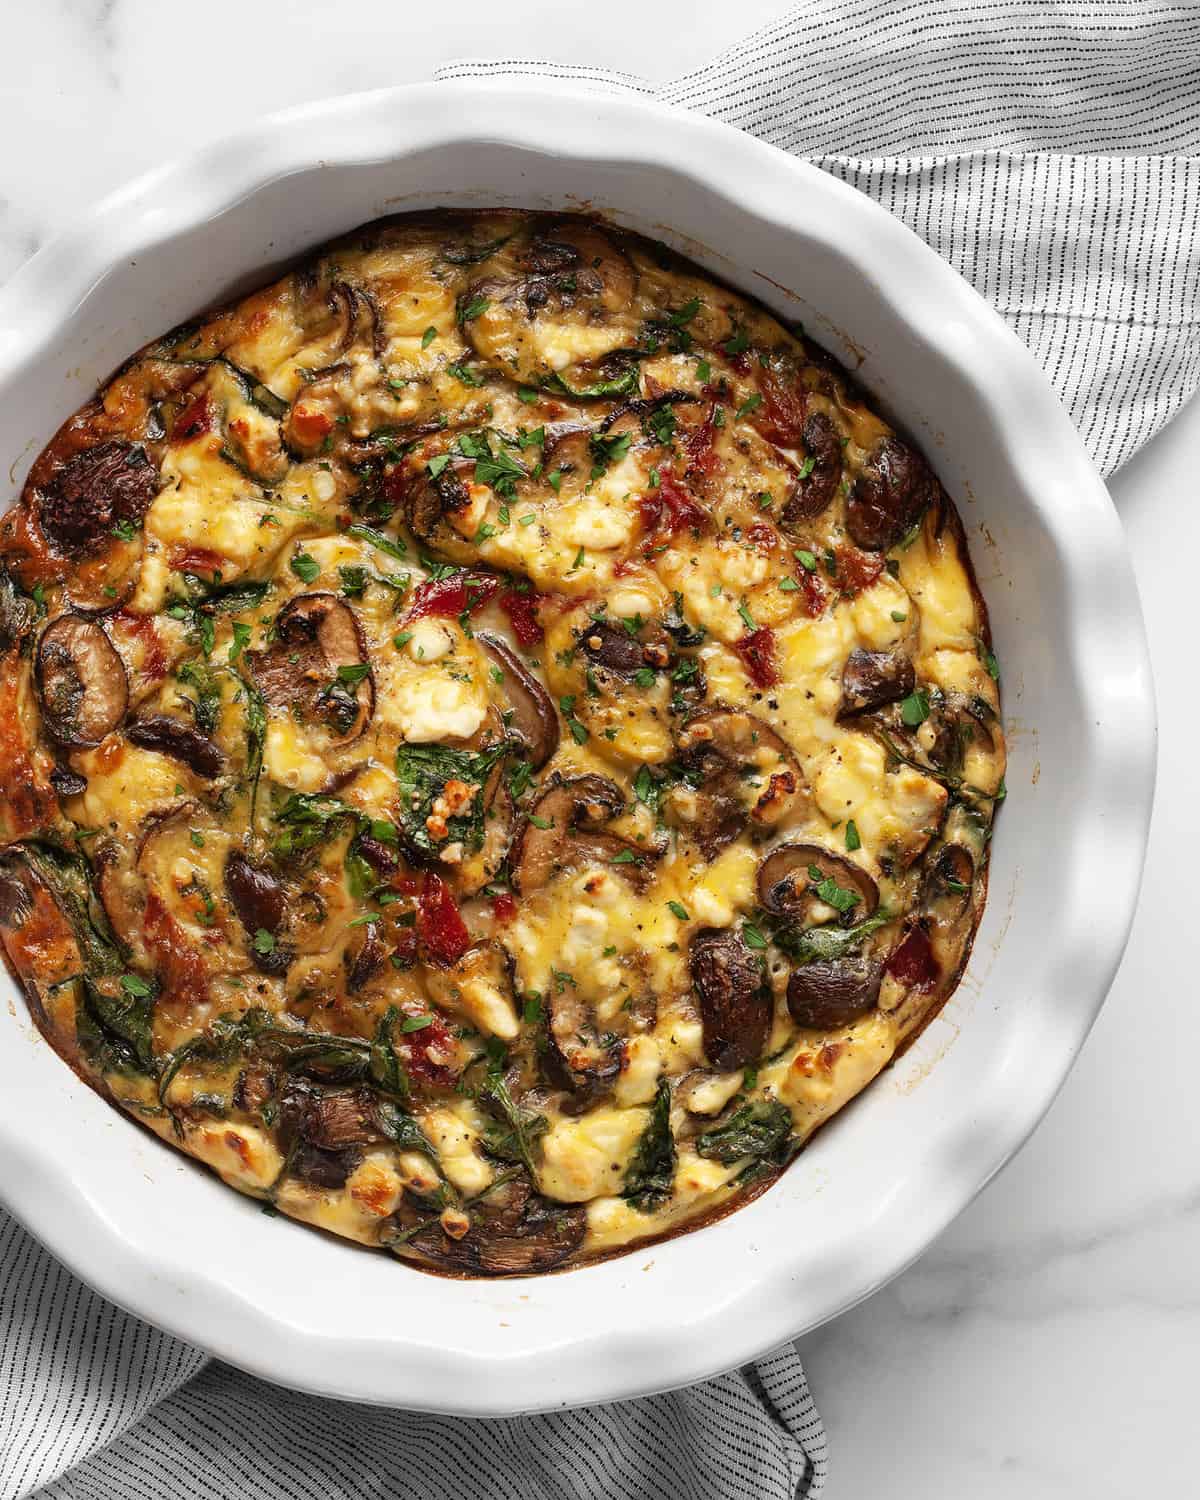 Crustless quiche with mushrooms, peppers, spinach and feta.